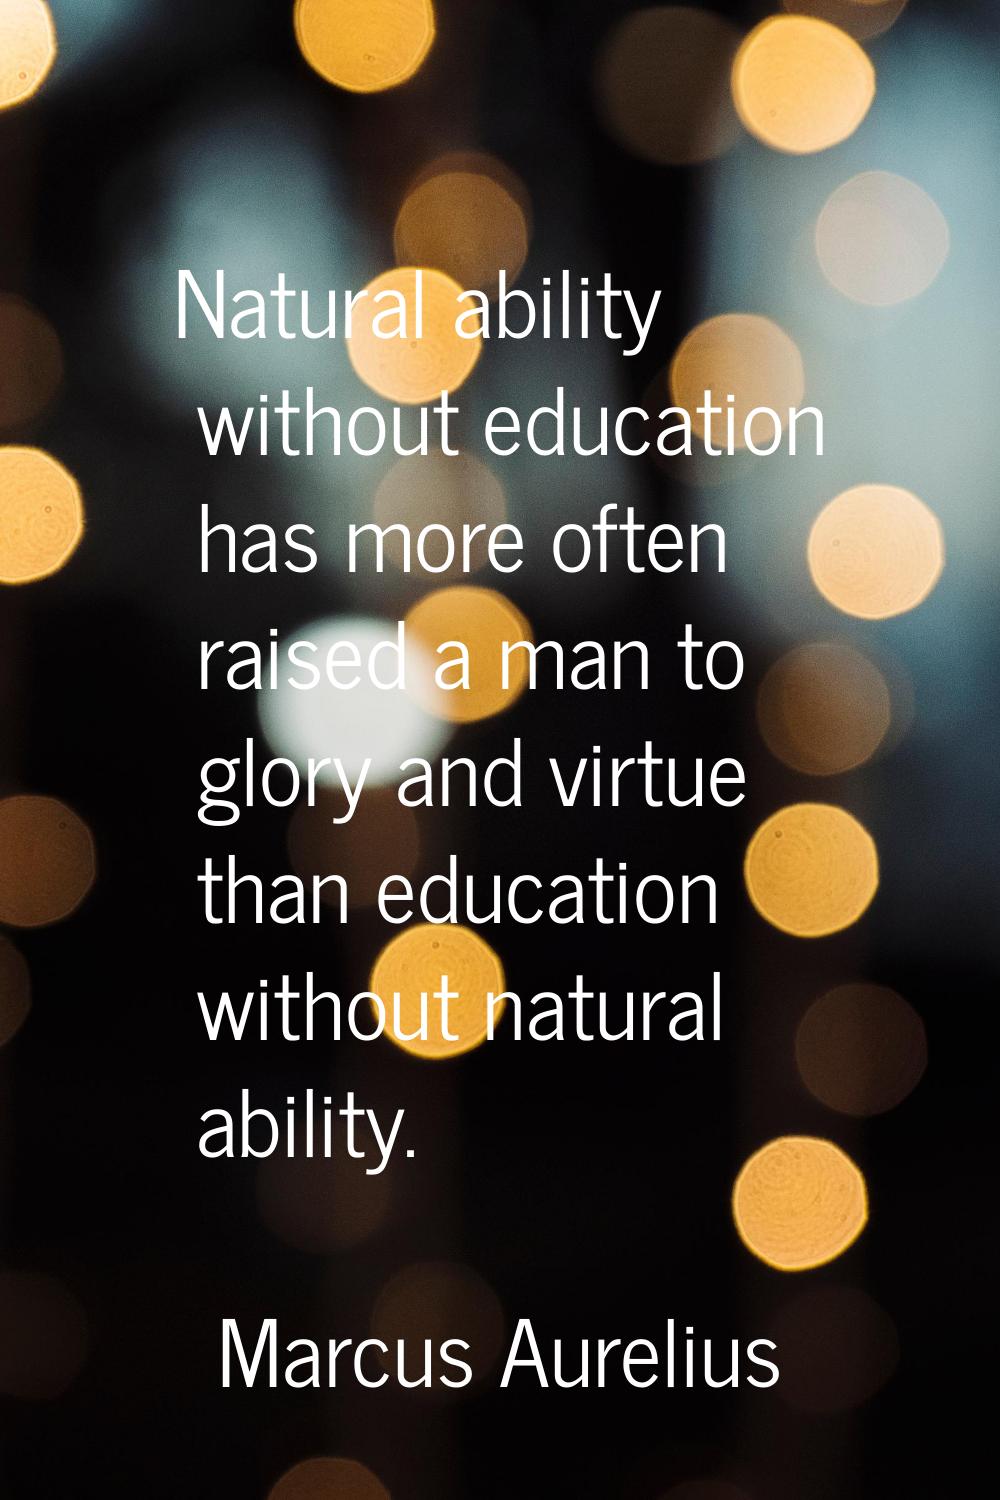 Natural ability without education has more often raised a man to glory and virtue than education wi